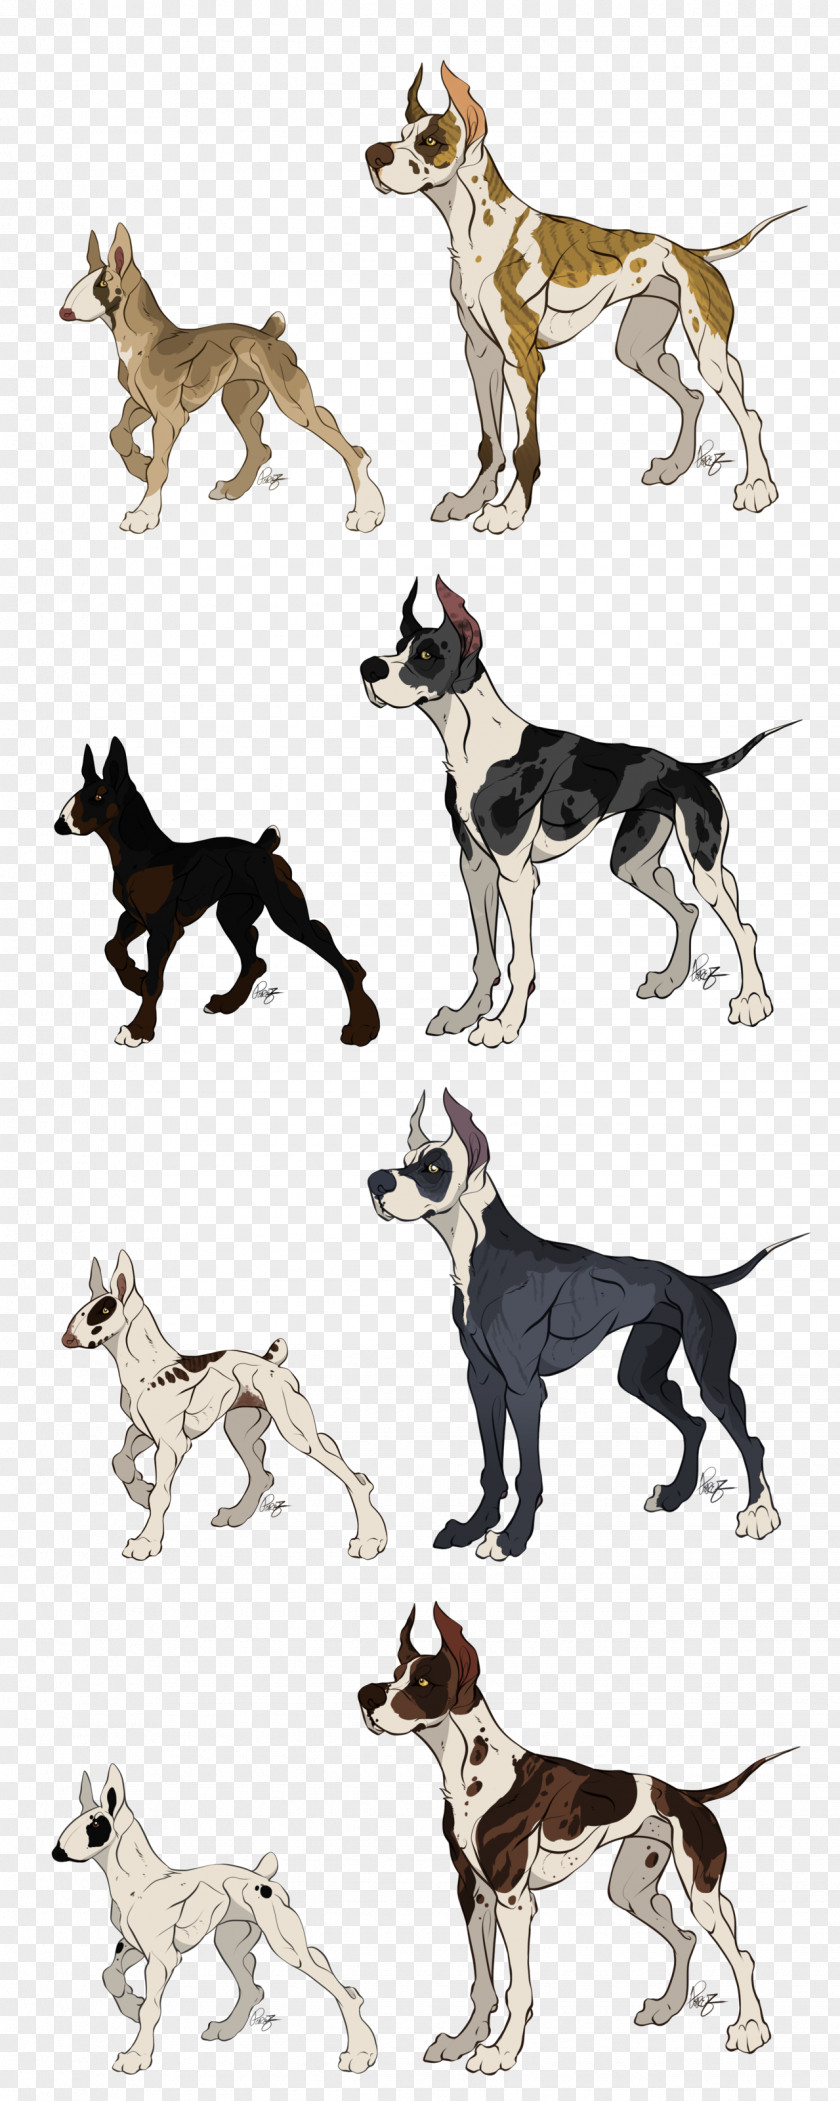 Dog Breed Whippet Crossbreed 08626 PNG